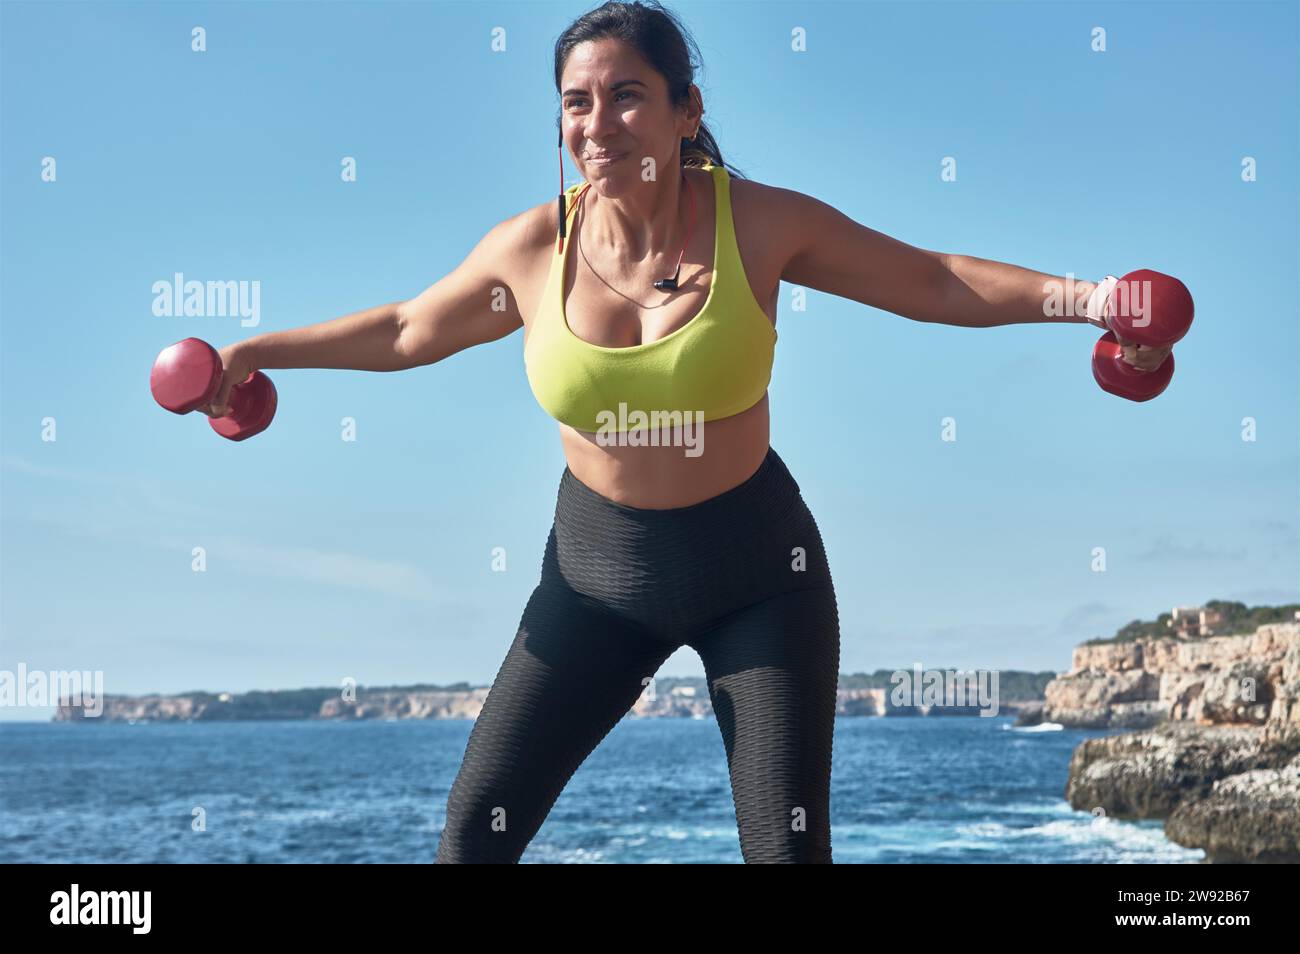 Latin woman, middle-aged, wearing sportswear, training, doing physical exercises, plank, sit-ups, climber's step, burning calories, keeping fit Stock Photo